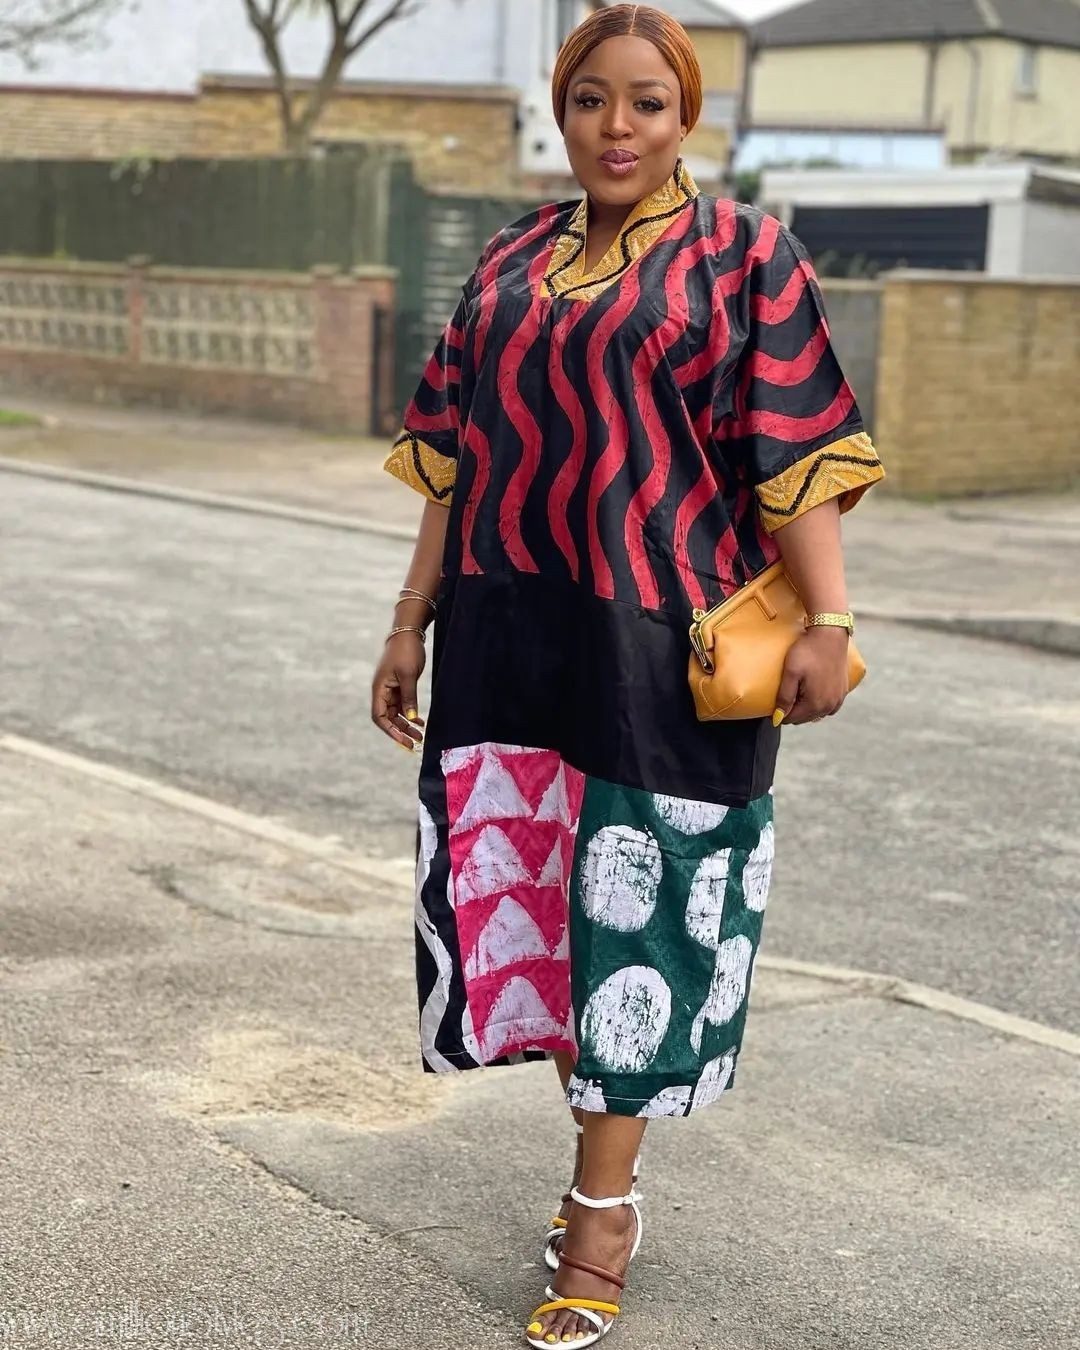 Rich Aunty Styles That Will Take Your Breath Away